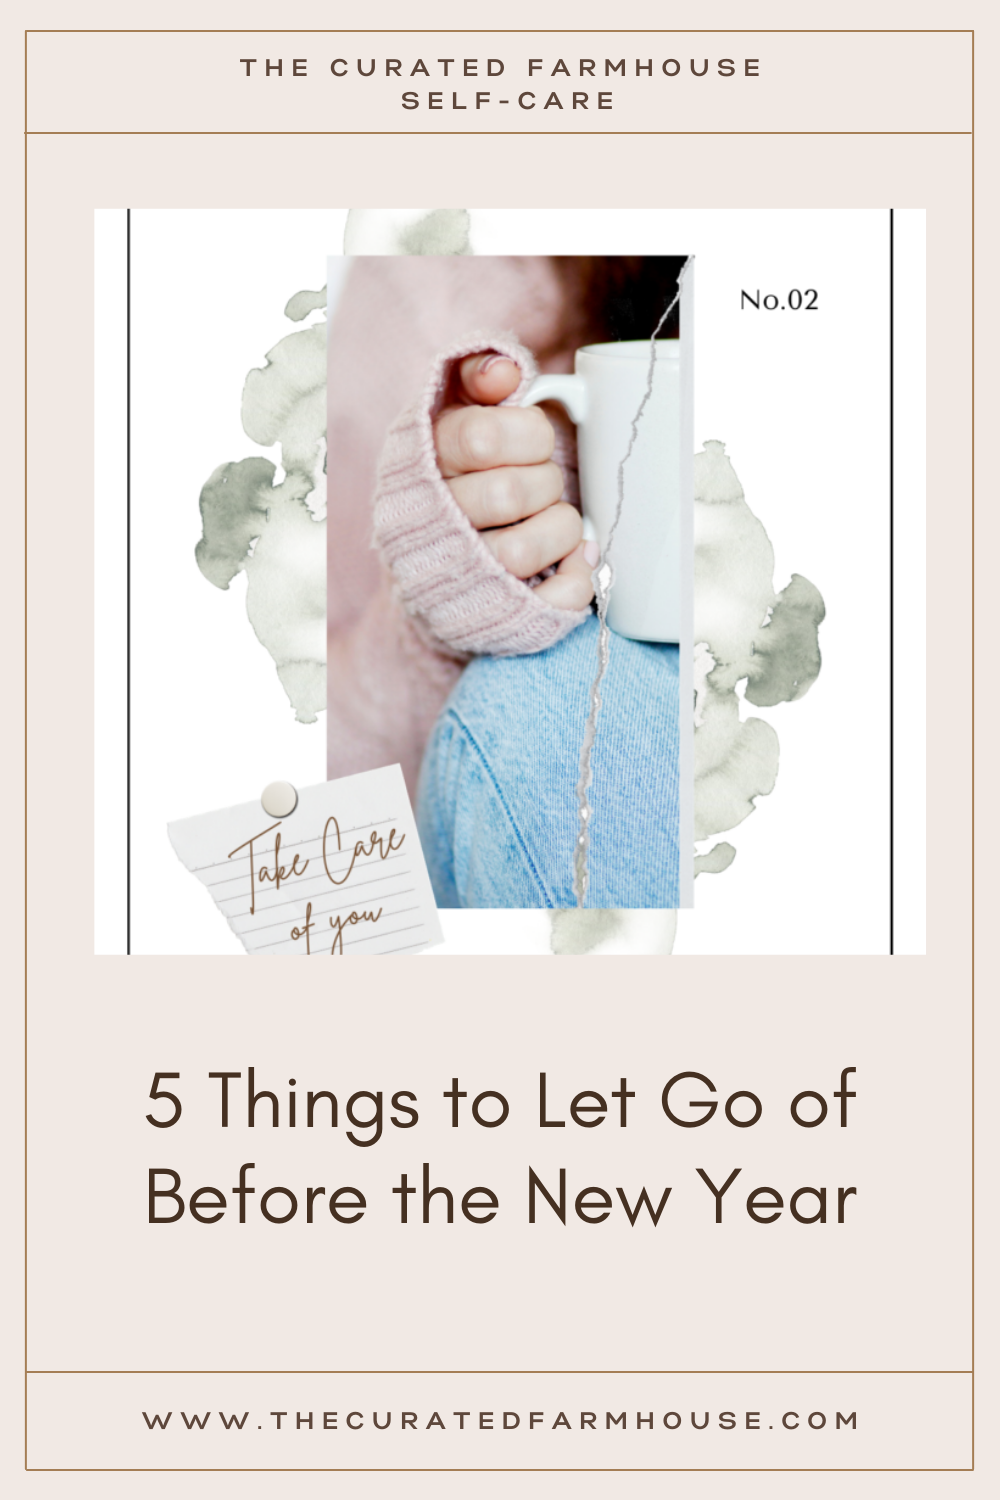 5 Things to Let Go of Before the New Year